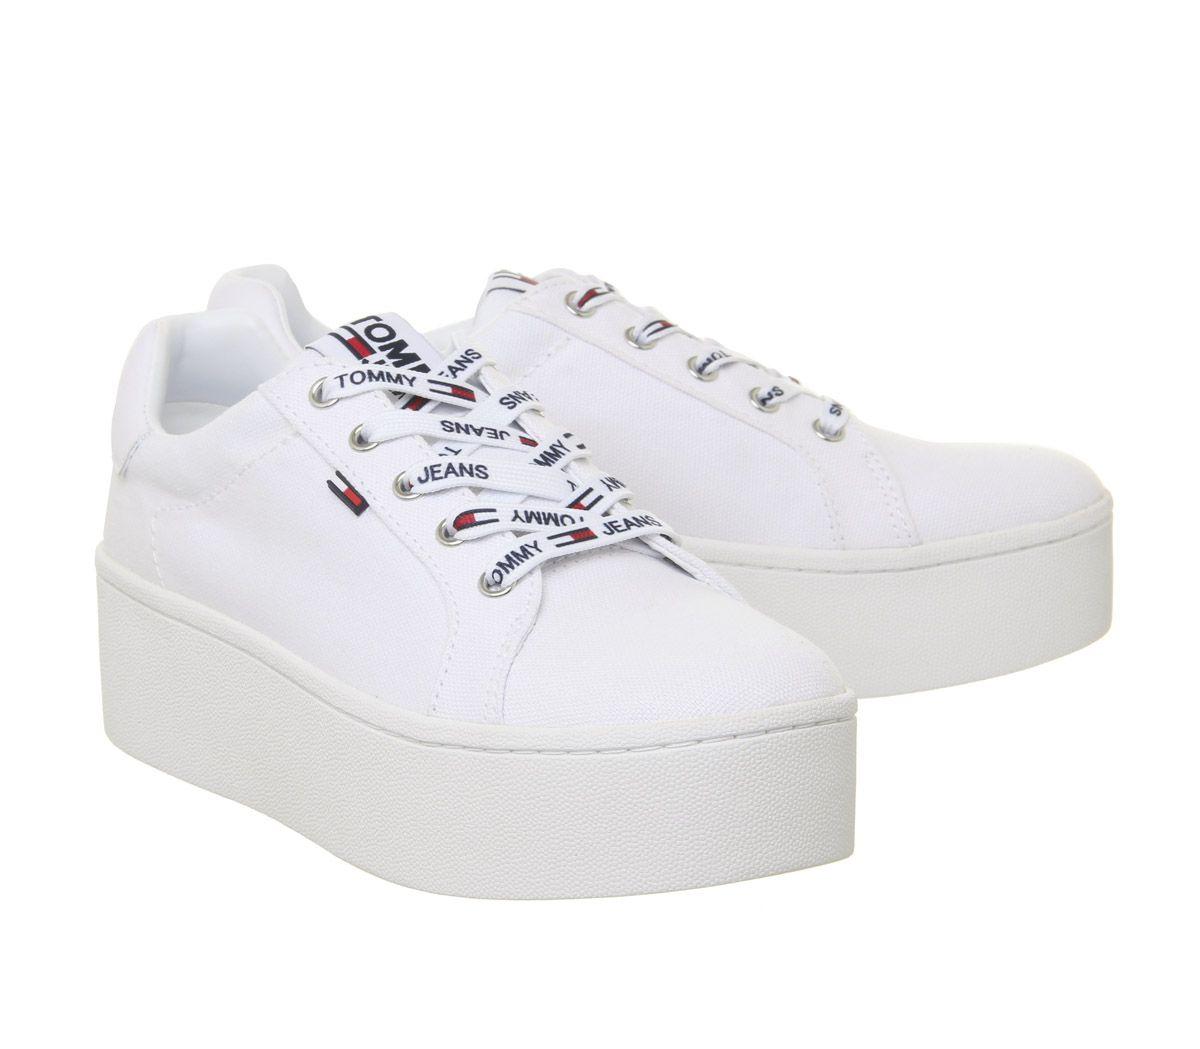 Tommy Jeans Roxie Sneakers Denmark, SAVE 45% - lacocinadepao.com